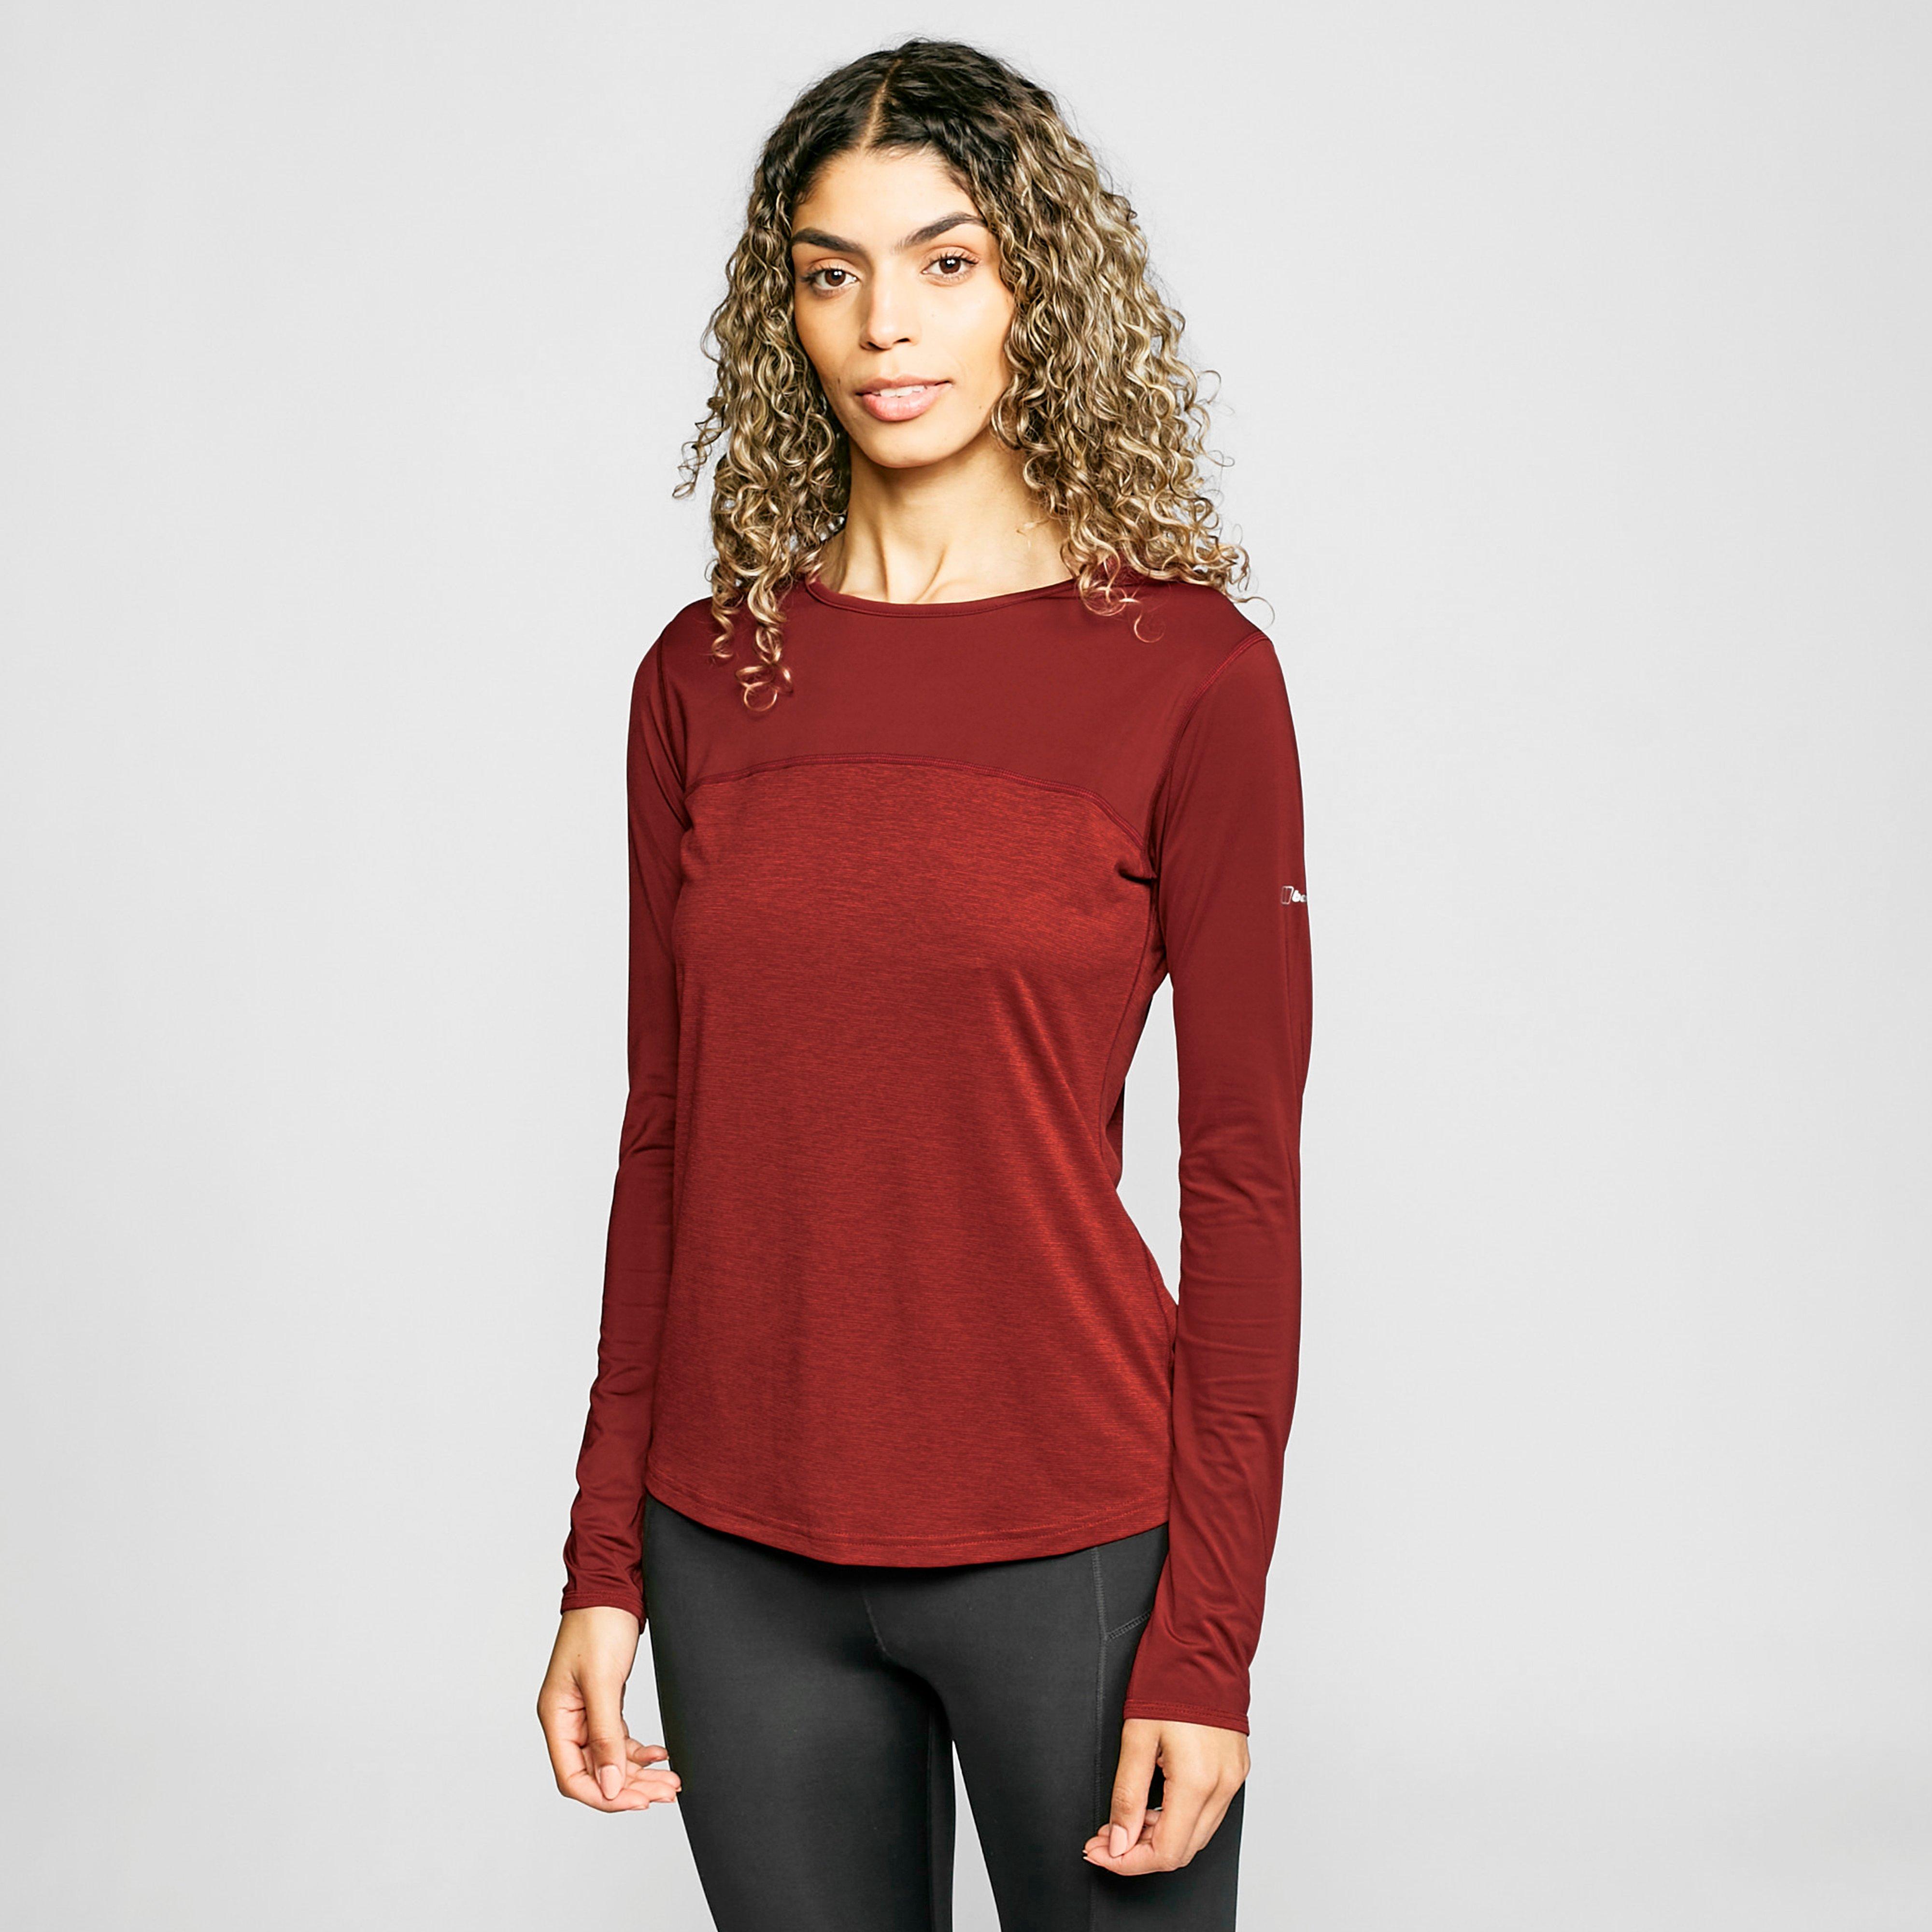 Berghaus Womens Voyager Tech Long Sleeve Top - Red/red  Red/red